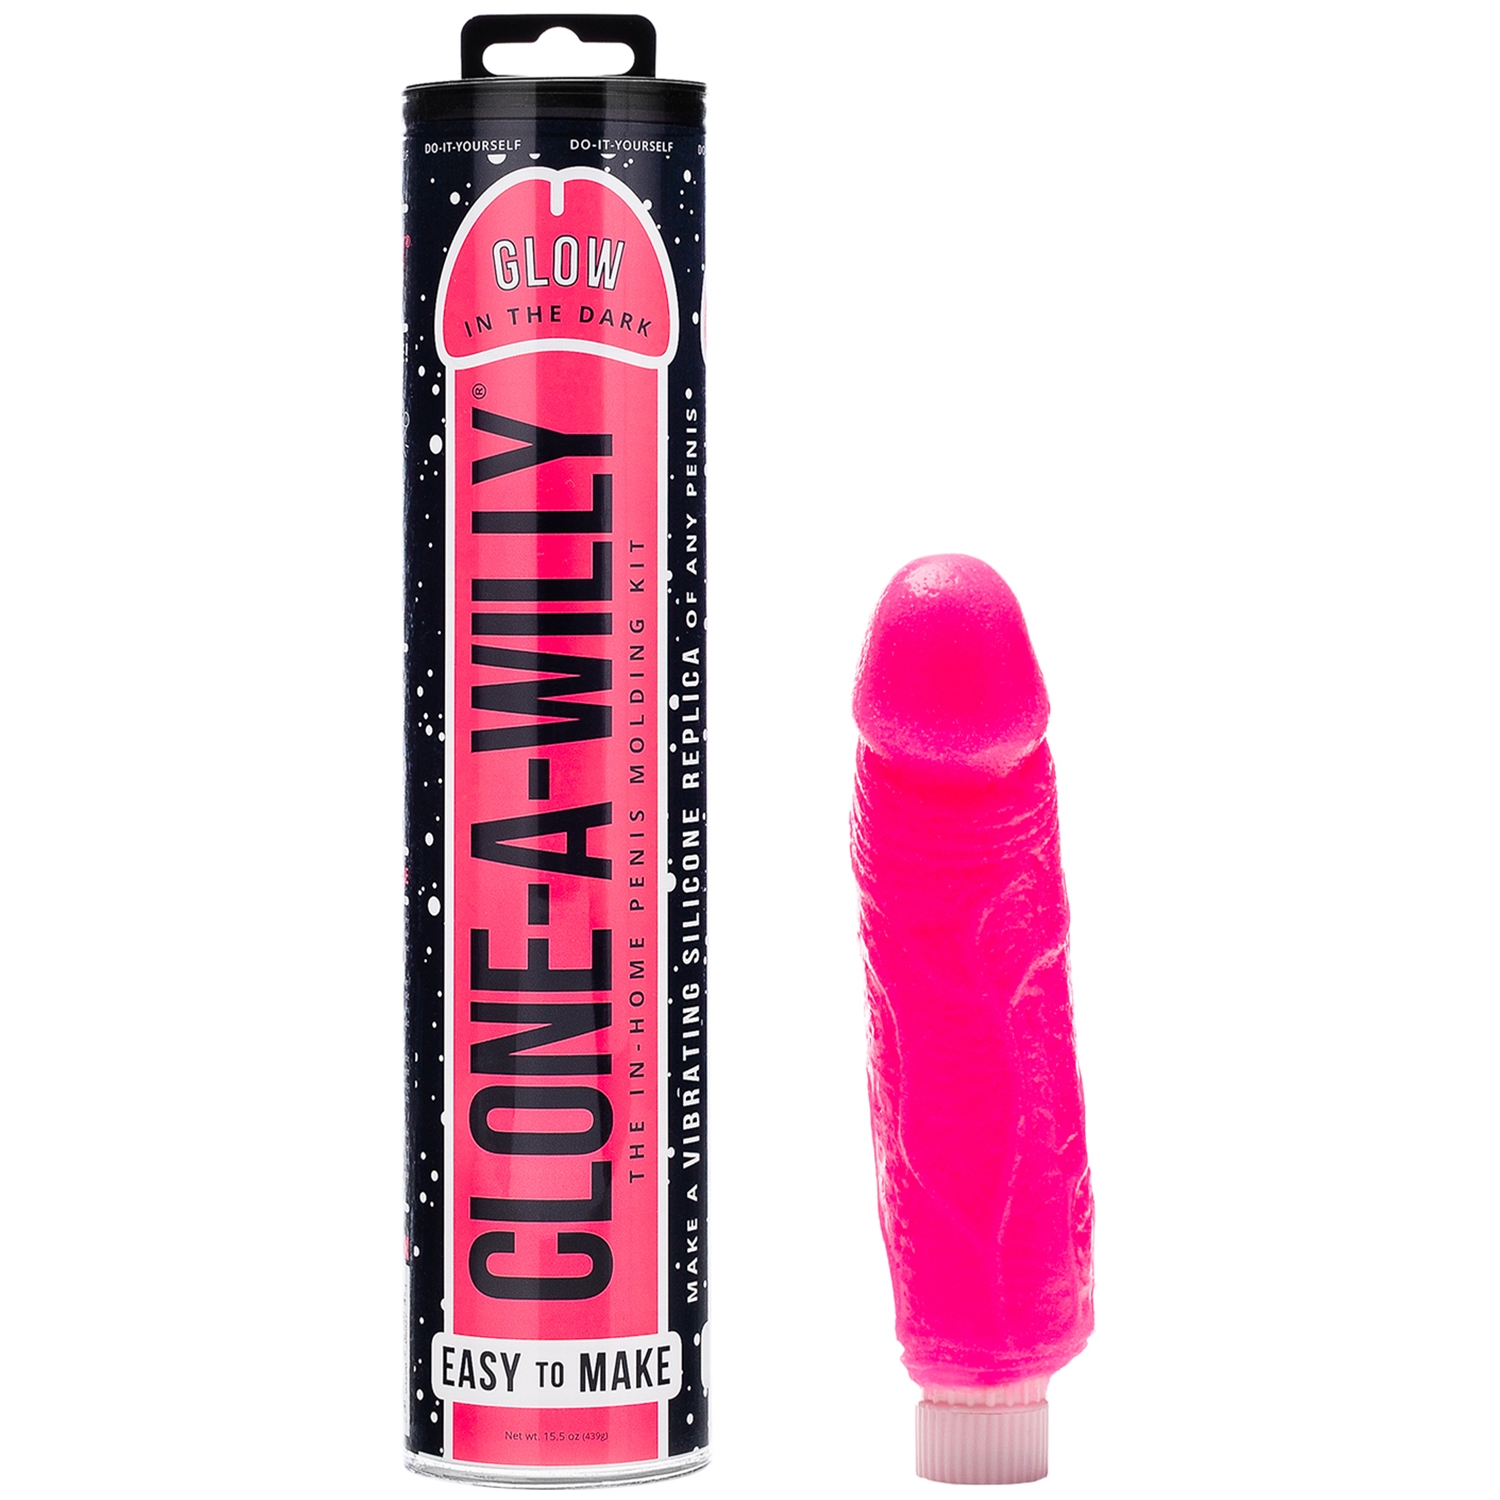 Clone-A-Willy Clone-A-Willy DIY Homemade Dildo Clone Kit Glow In The Dark Pink - Rosa